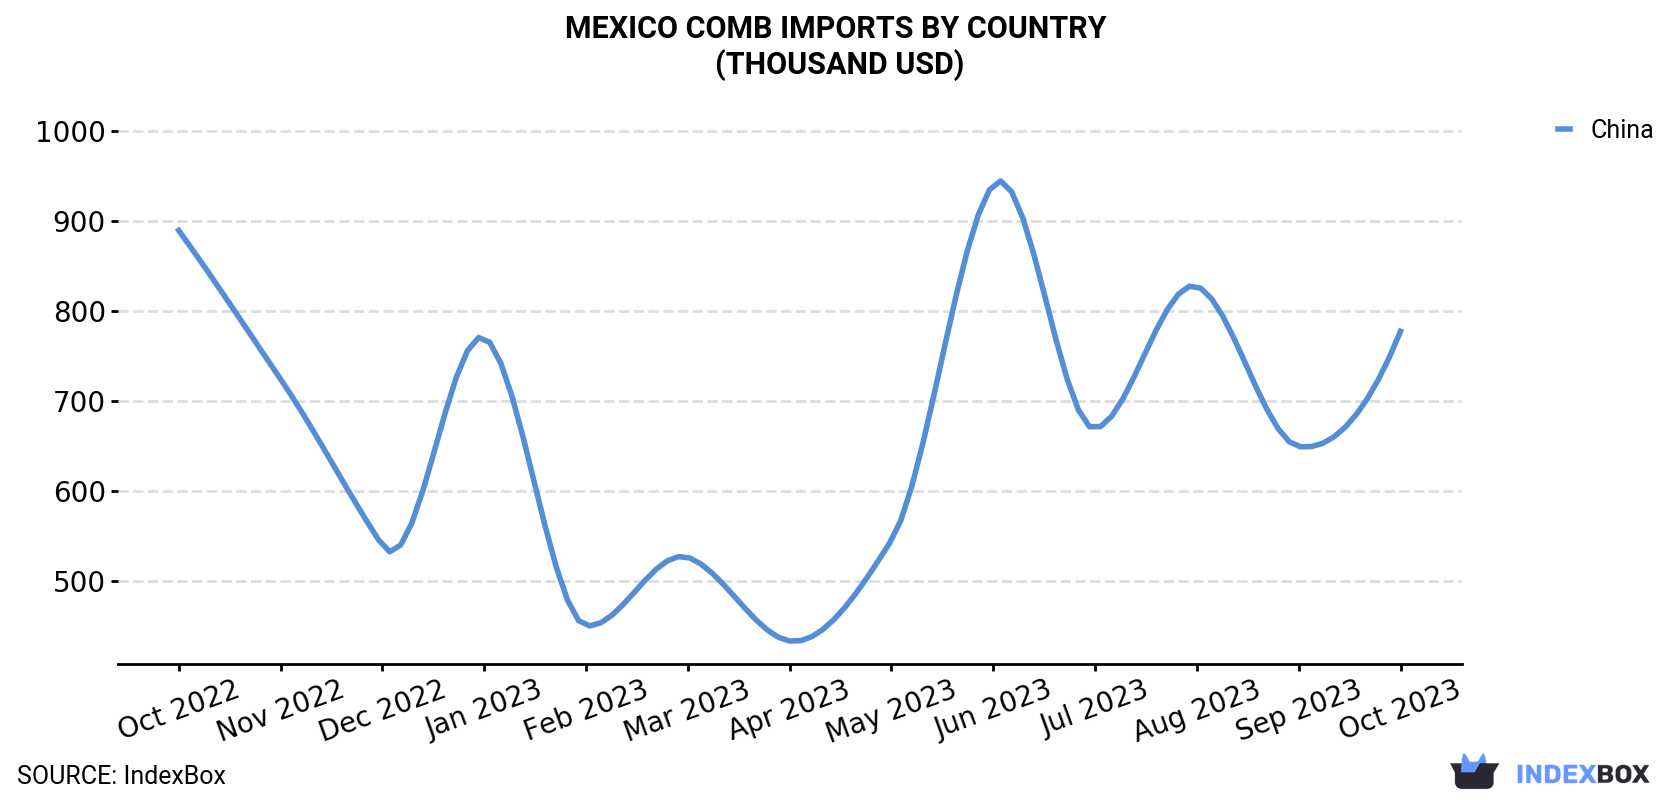 Mexico Comb Imports By Country (Thousand USD)